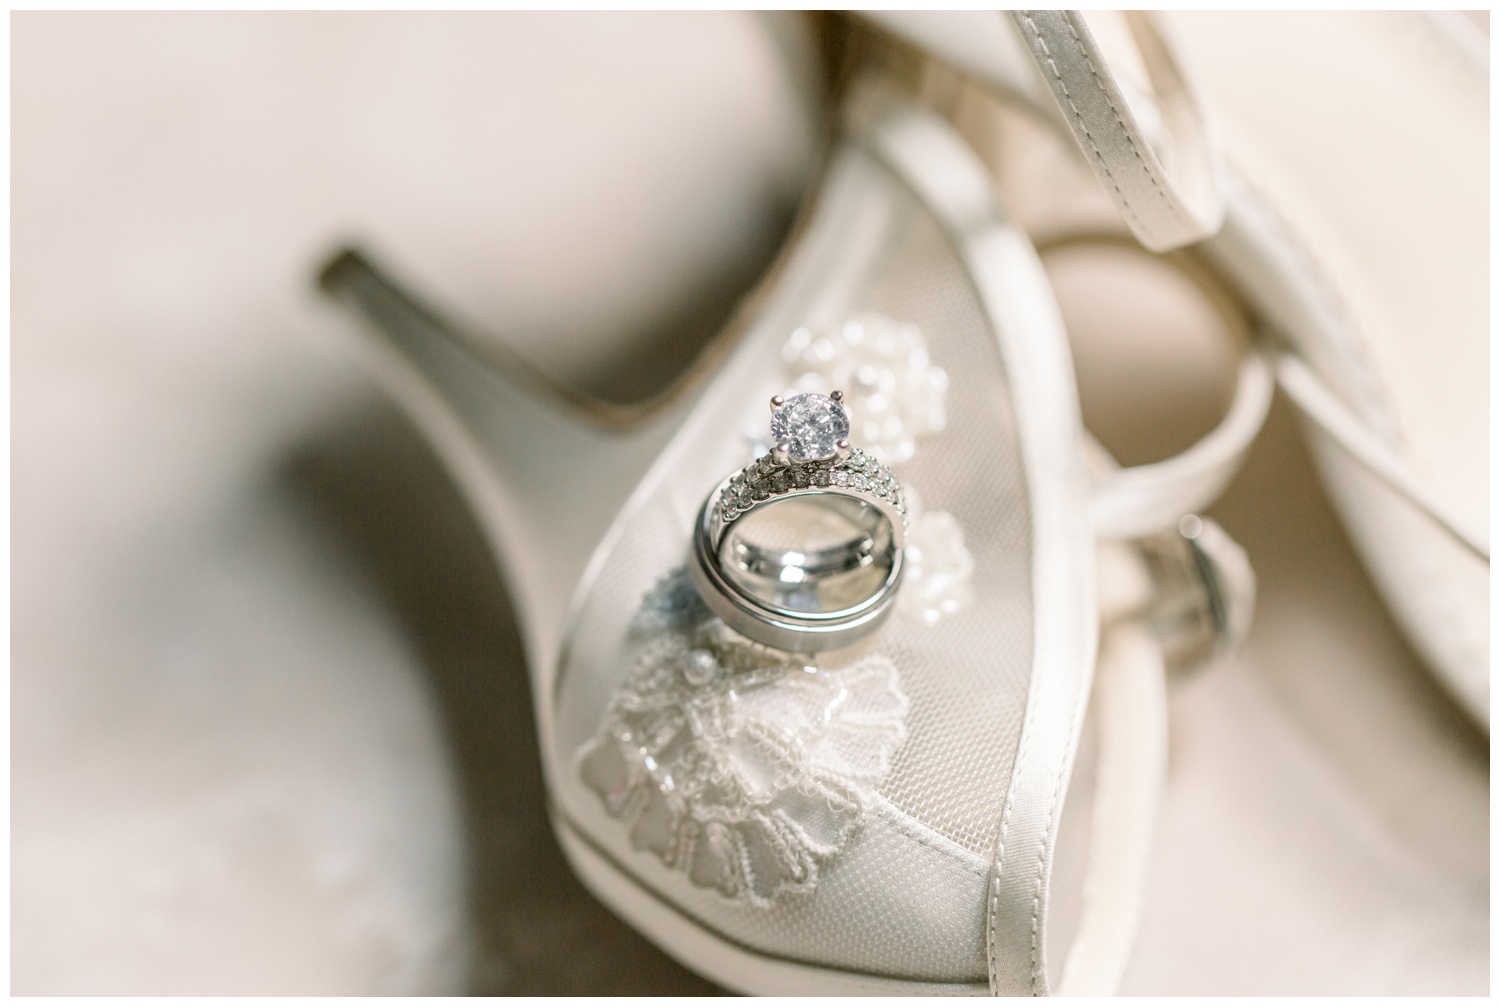 Bella Belle Shoes and Wedding Rings